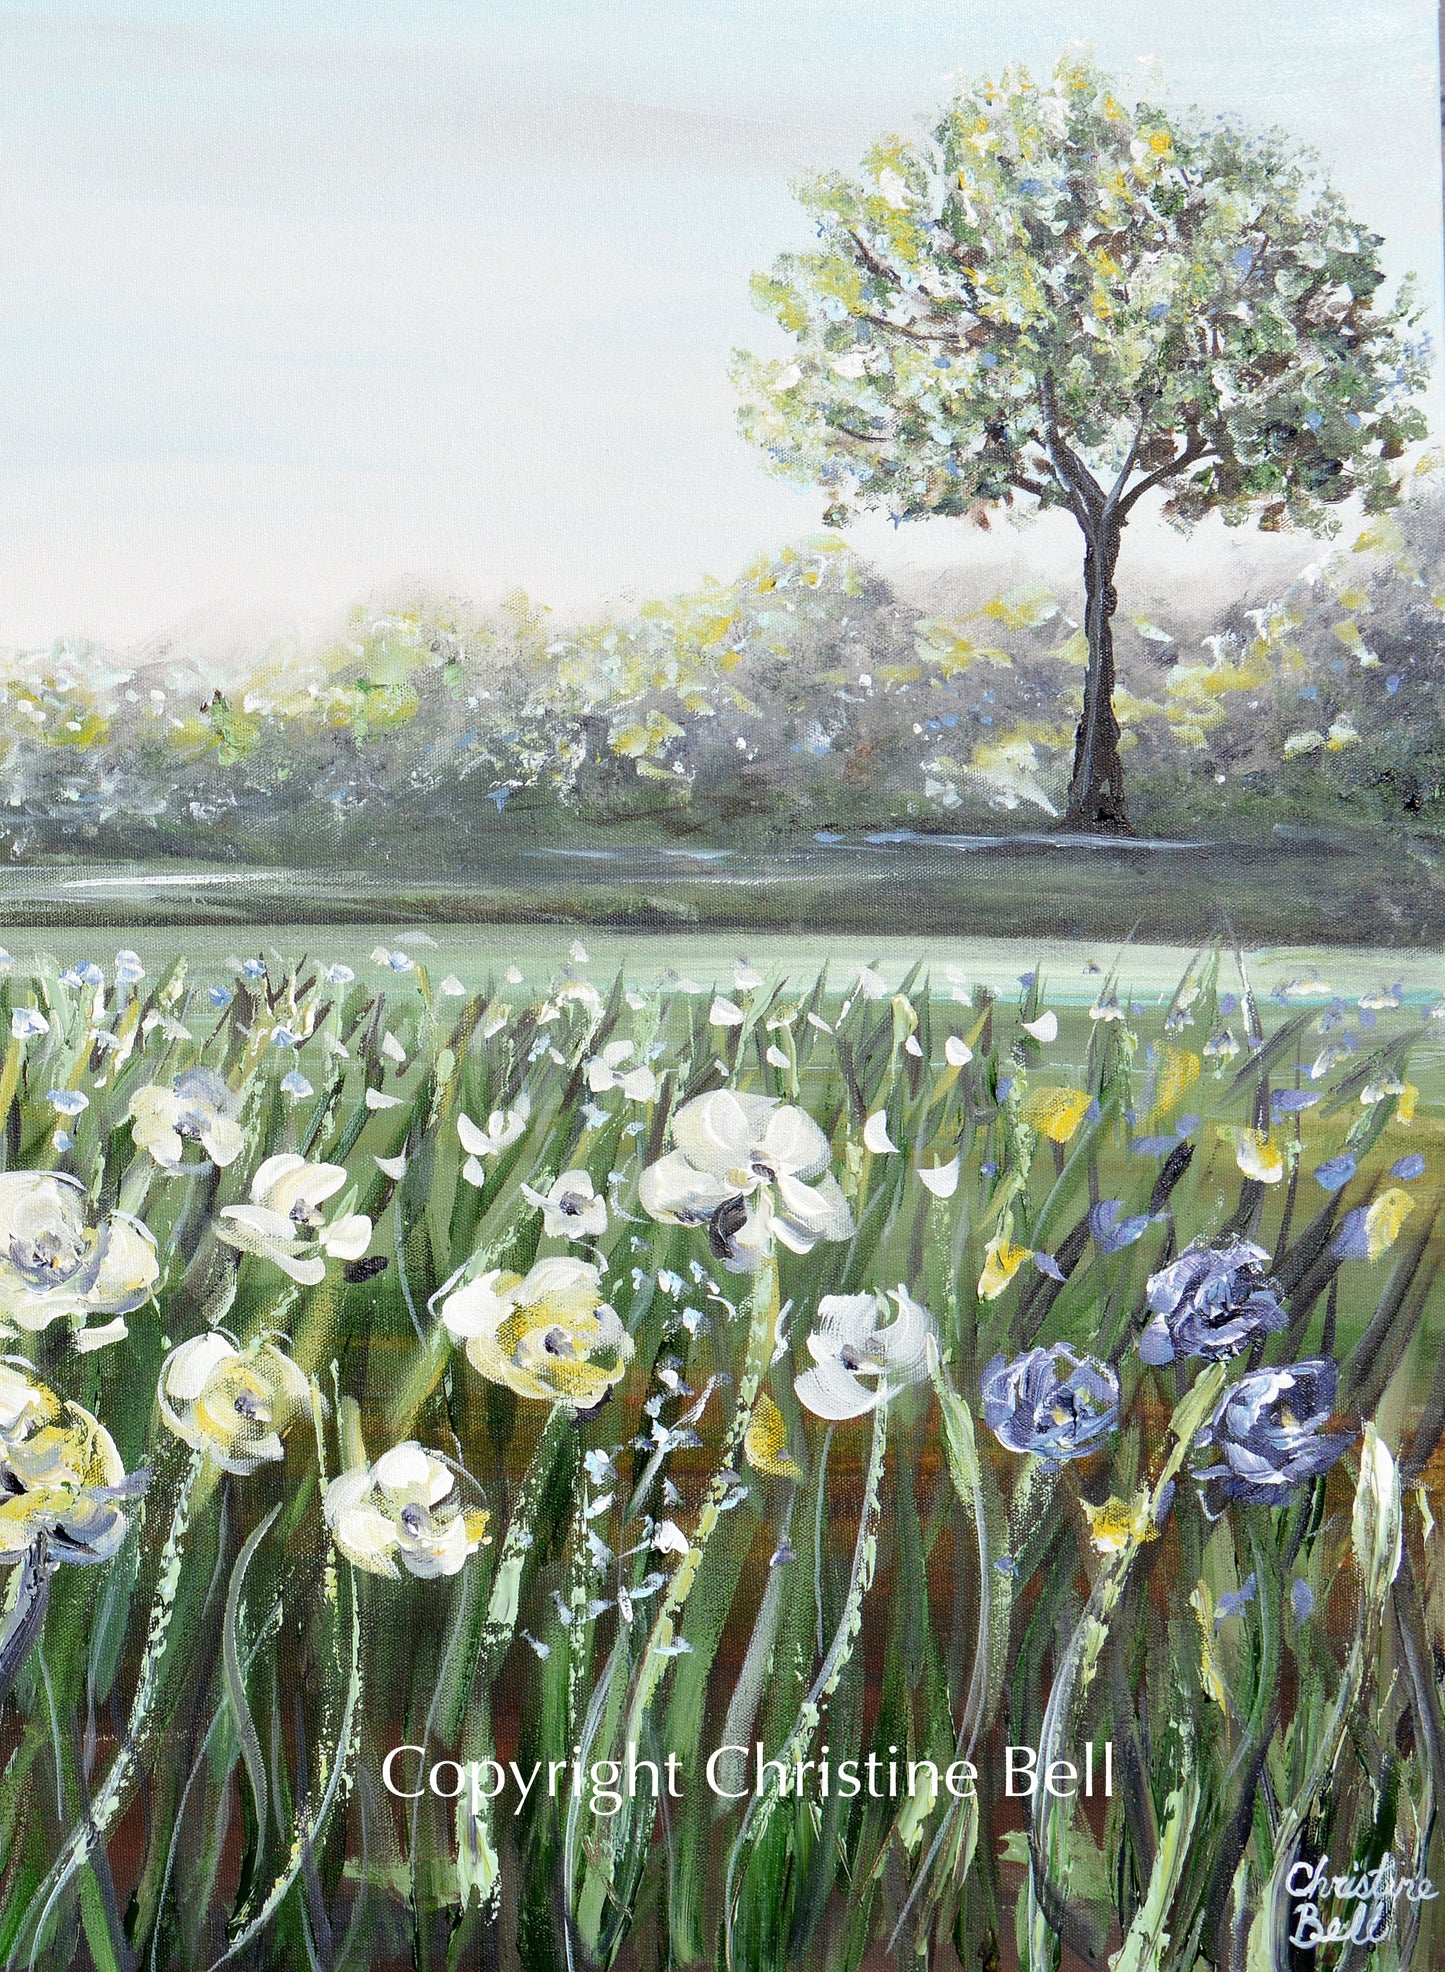 "A Place of Peace" GICLEE PRINT Art Floral Landscape Painting White Flowers Field Tree